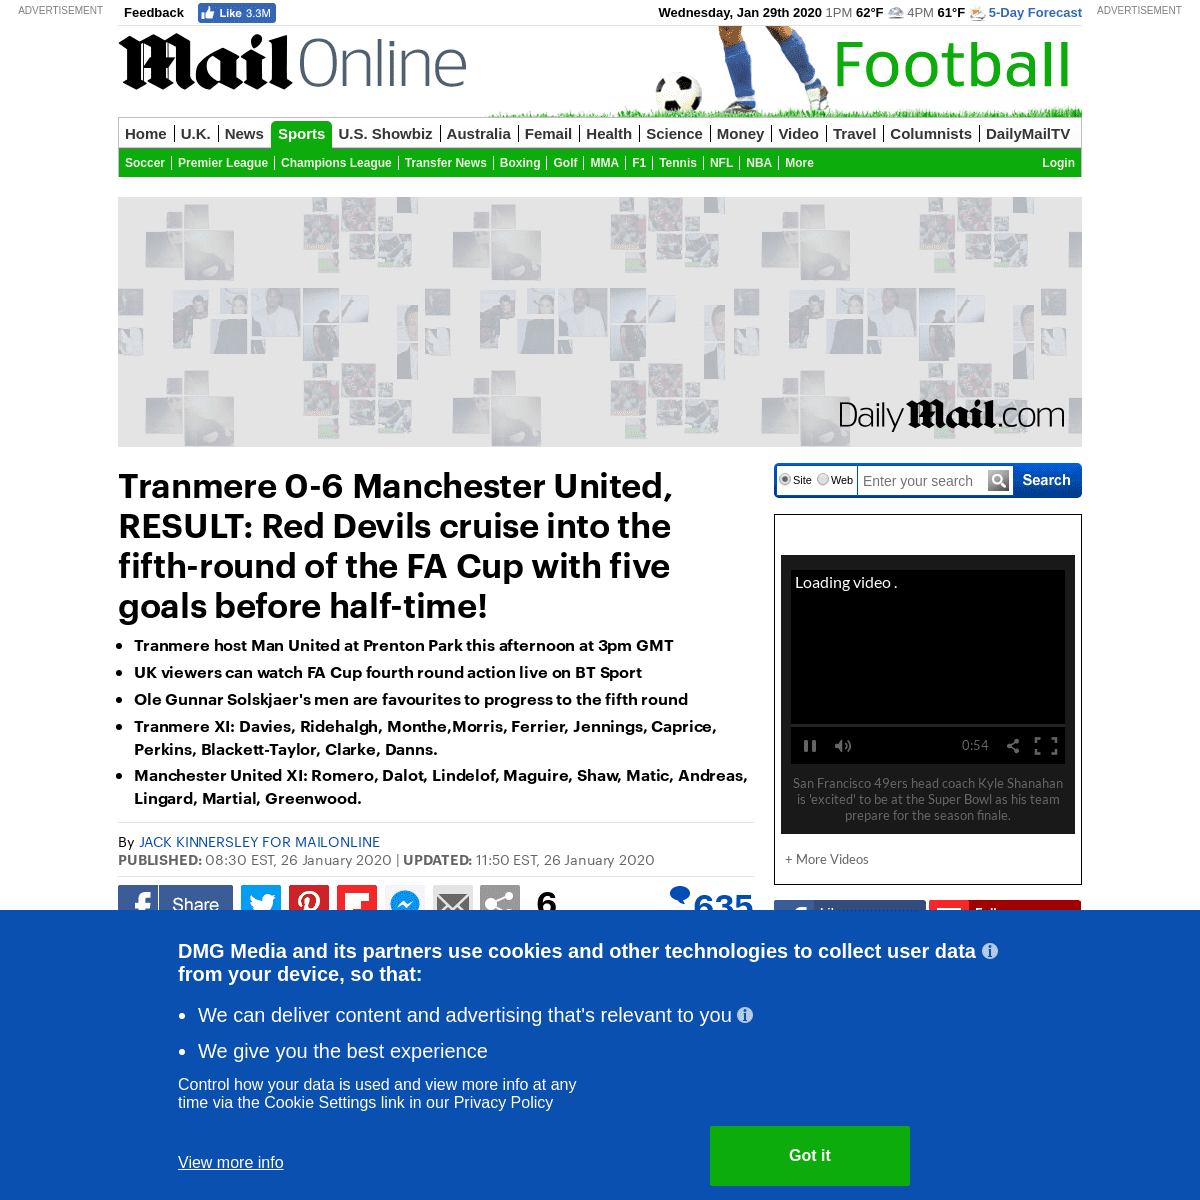 A complete backup of www.dailymail.co.uk/sport/football/article-7930847/Tranmere-vs-Manchester-United-FA-Cup-Fourth-Round-Live-s